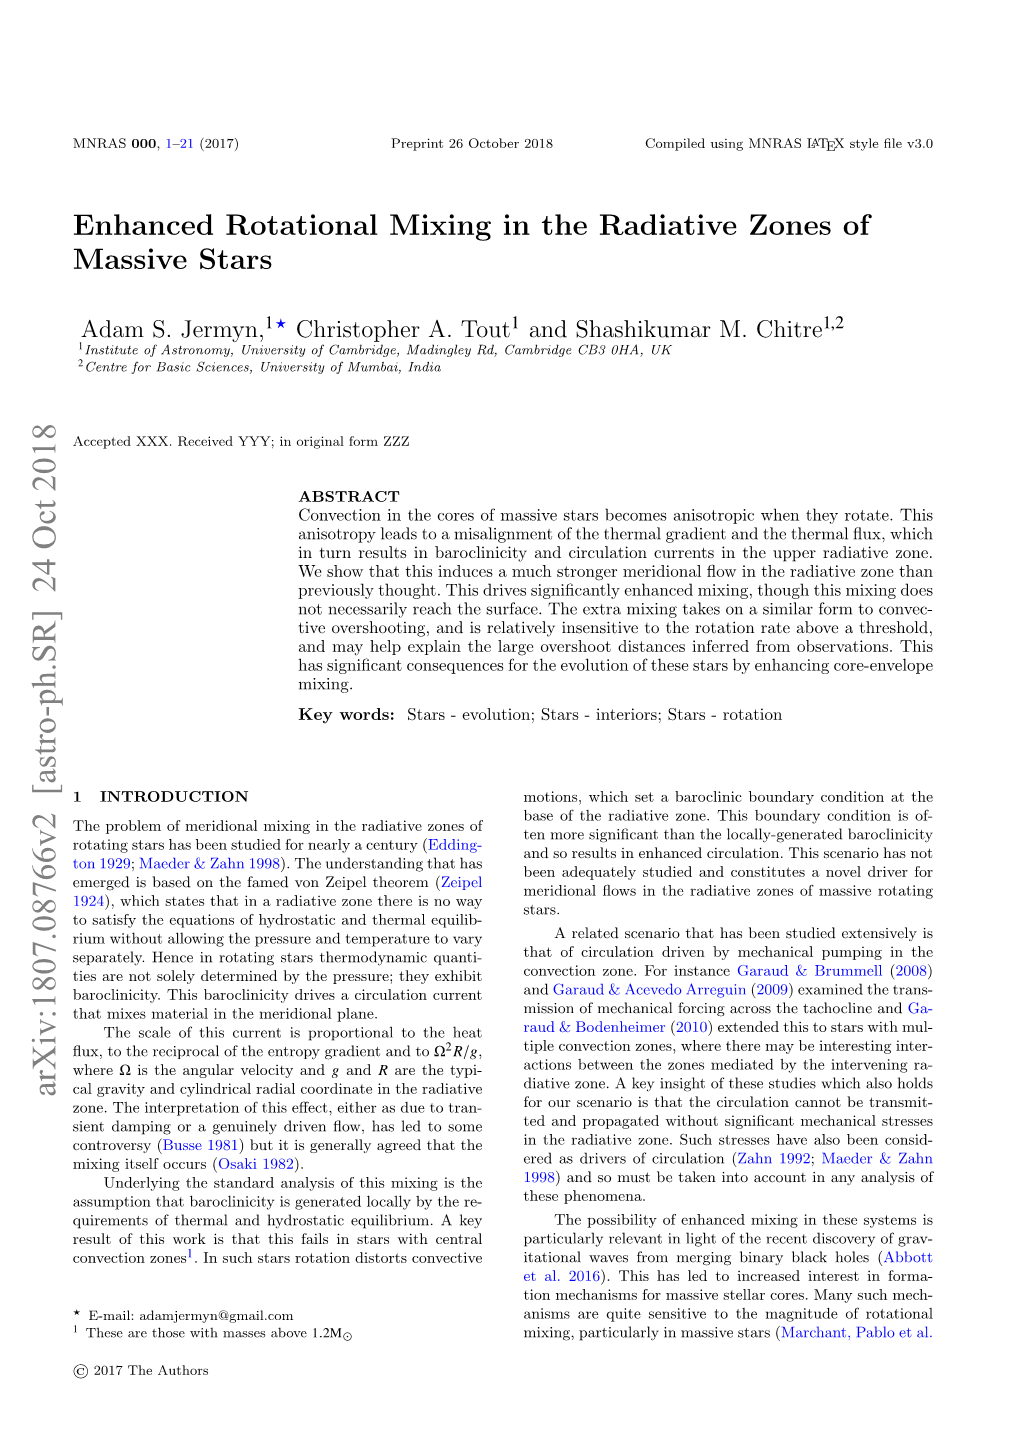 Enhanced Rotational Mixing in the Radiative Zones of Massive Stars